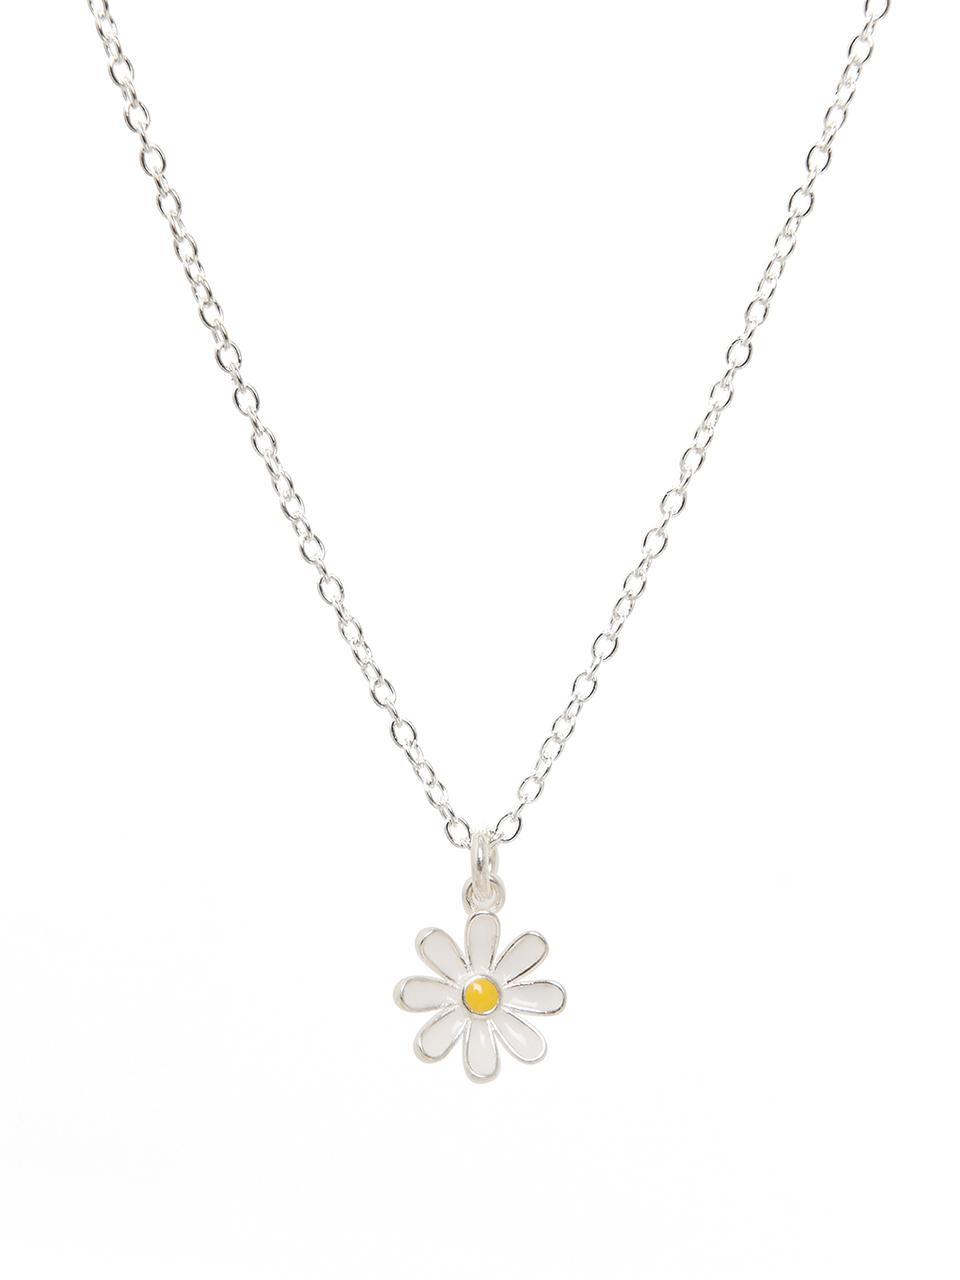 WIL201 Silver925 Daisy Necklace